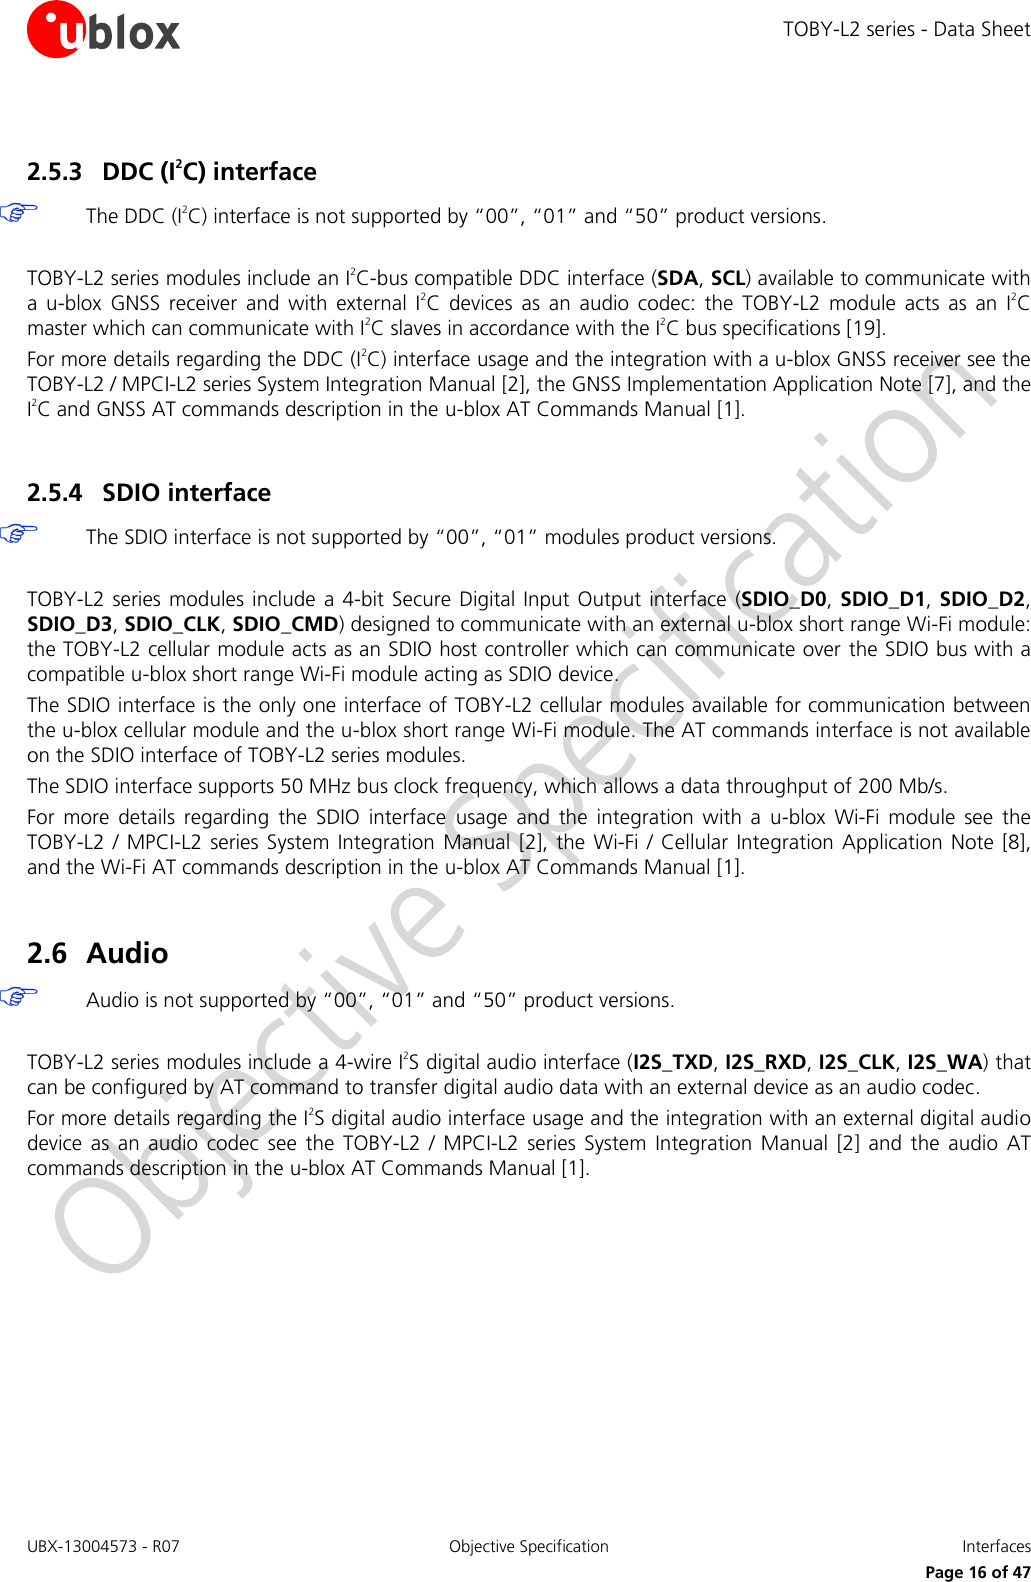 TOBY-L2 series - Data Sheet UBX-13004573 - R07  Objective Specification  Interfaces   Page 16 of 47 2.5.3 DDC (I2C) interface  The DDC (I2C) interface is not supported by “00”, “01” and “50” product versions.  TOBY-L2 series modules include an I2C-bus compatible DDC interface (SDA, SCL) available to communicate with a  u-blox  GNSS  receiver  and  with  external  I2C  devices  as  an  audio  codec:  the  TOBY-L2  module  acts  as  an  I2C master which can communicate with I2C slaves in accordance with the I2C bus specifications [19]. For more details regarding the DDC (I2C) interface usage and the integration with a u-blox GNSS receiver see the TOBY-L2 / MPCI-L2 series System Integration Manual [2], the GNSS Implementation Application Note [7], and the I2C and GNSS AT commands description in the u-blox AT Commands Manual [1].  2.5.4 SDIO interface  The SDIO interface is not supported by “00”, “01” modules product versions.  TOBY-L2  series modules  include  a 4-bit Secure Digital Input Output  interface (SDIO_D0, SDIO_D1, SDIO_D2, SDIO_D3, SDIO_CLK, SDIO_CMD) designed to communicate with an external u-blox short range Wi-Fi module: the TOBY-L2 cellular module acts as an SDIO host controller which can communicate over the SDIO bus with a compatible u-blox short range Wi-Fi module acting as SDIO device. The SDIO interface is the only one interface of TOBY-L2 cellular modules available for communication between the u-blox cellular module and the u-blox short range Wi-Fi module. The AT commands interface is not available on the SDIO interface of TOBY-L2 series modules. The SDIO interface supports 50 MHz bus clock frequency, which allows a data throughput of 200 Mb/s. For  more  details  regarding  the  SDIO  interface  usage  and  the  integration  with  a  u-blox  Wi-Fi  module  see  the TOBY-L2  / MPCI-L2  series System  Integration  Manual  [2], the  Wi-Fi  / Cellular  Integration Application  Note [8], and the Wi-Fi AT commands description in the u-blox AT Commands Manual [1].  2.6 Audio  Audio is not supported by “00”, “01” and “50” product versions.  TOBY-L2 series modules include a 4-wire I2S digital audio interface (I2S_TXD, I2S_RXD, I2S_CLK, I2S_WA) that can be configured by AT command to transfer digital audio data with an external device as an audio codec. For more details regarding the I2S digital audio interface usage and the integration with an external digital audio device  as  an  audio  codec  see  the  TOBY-L2  /  MPCI-L2  series  System  Integration  Manual  [2]  and  the  audio  AT commands description in the u-blox AT Commands Manual [1].  